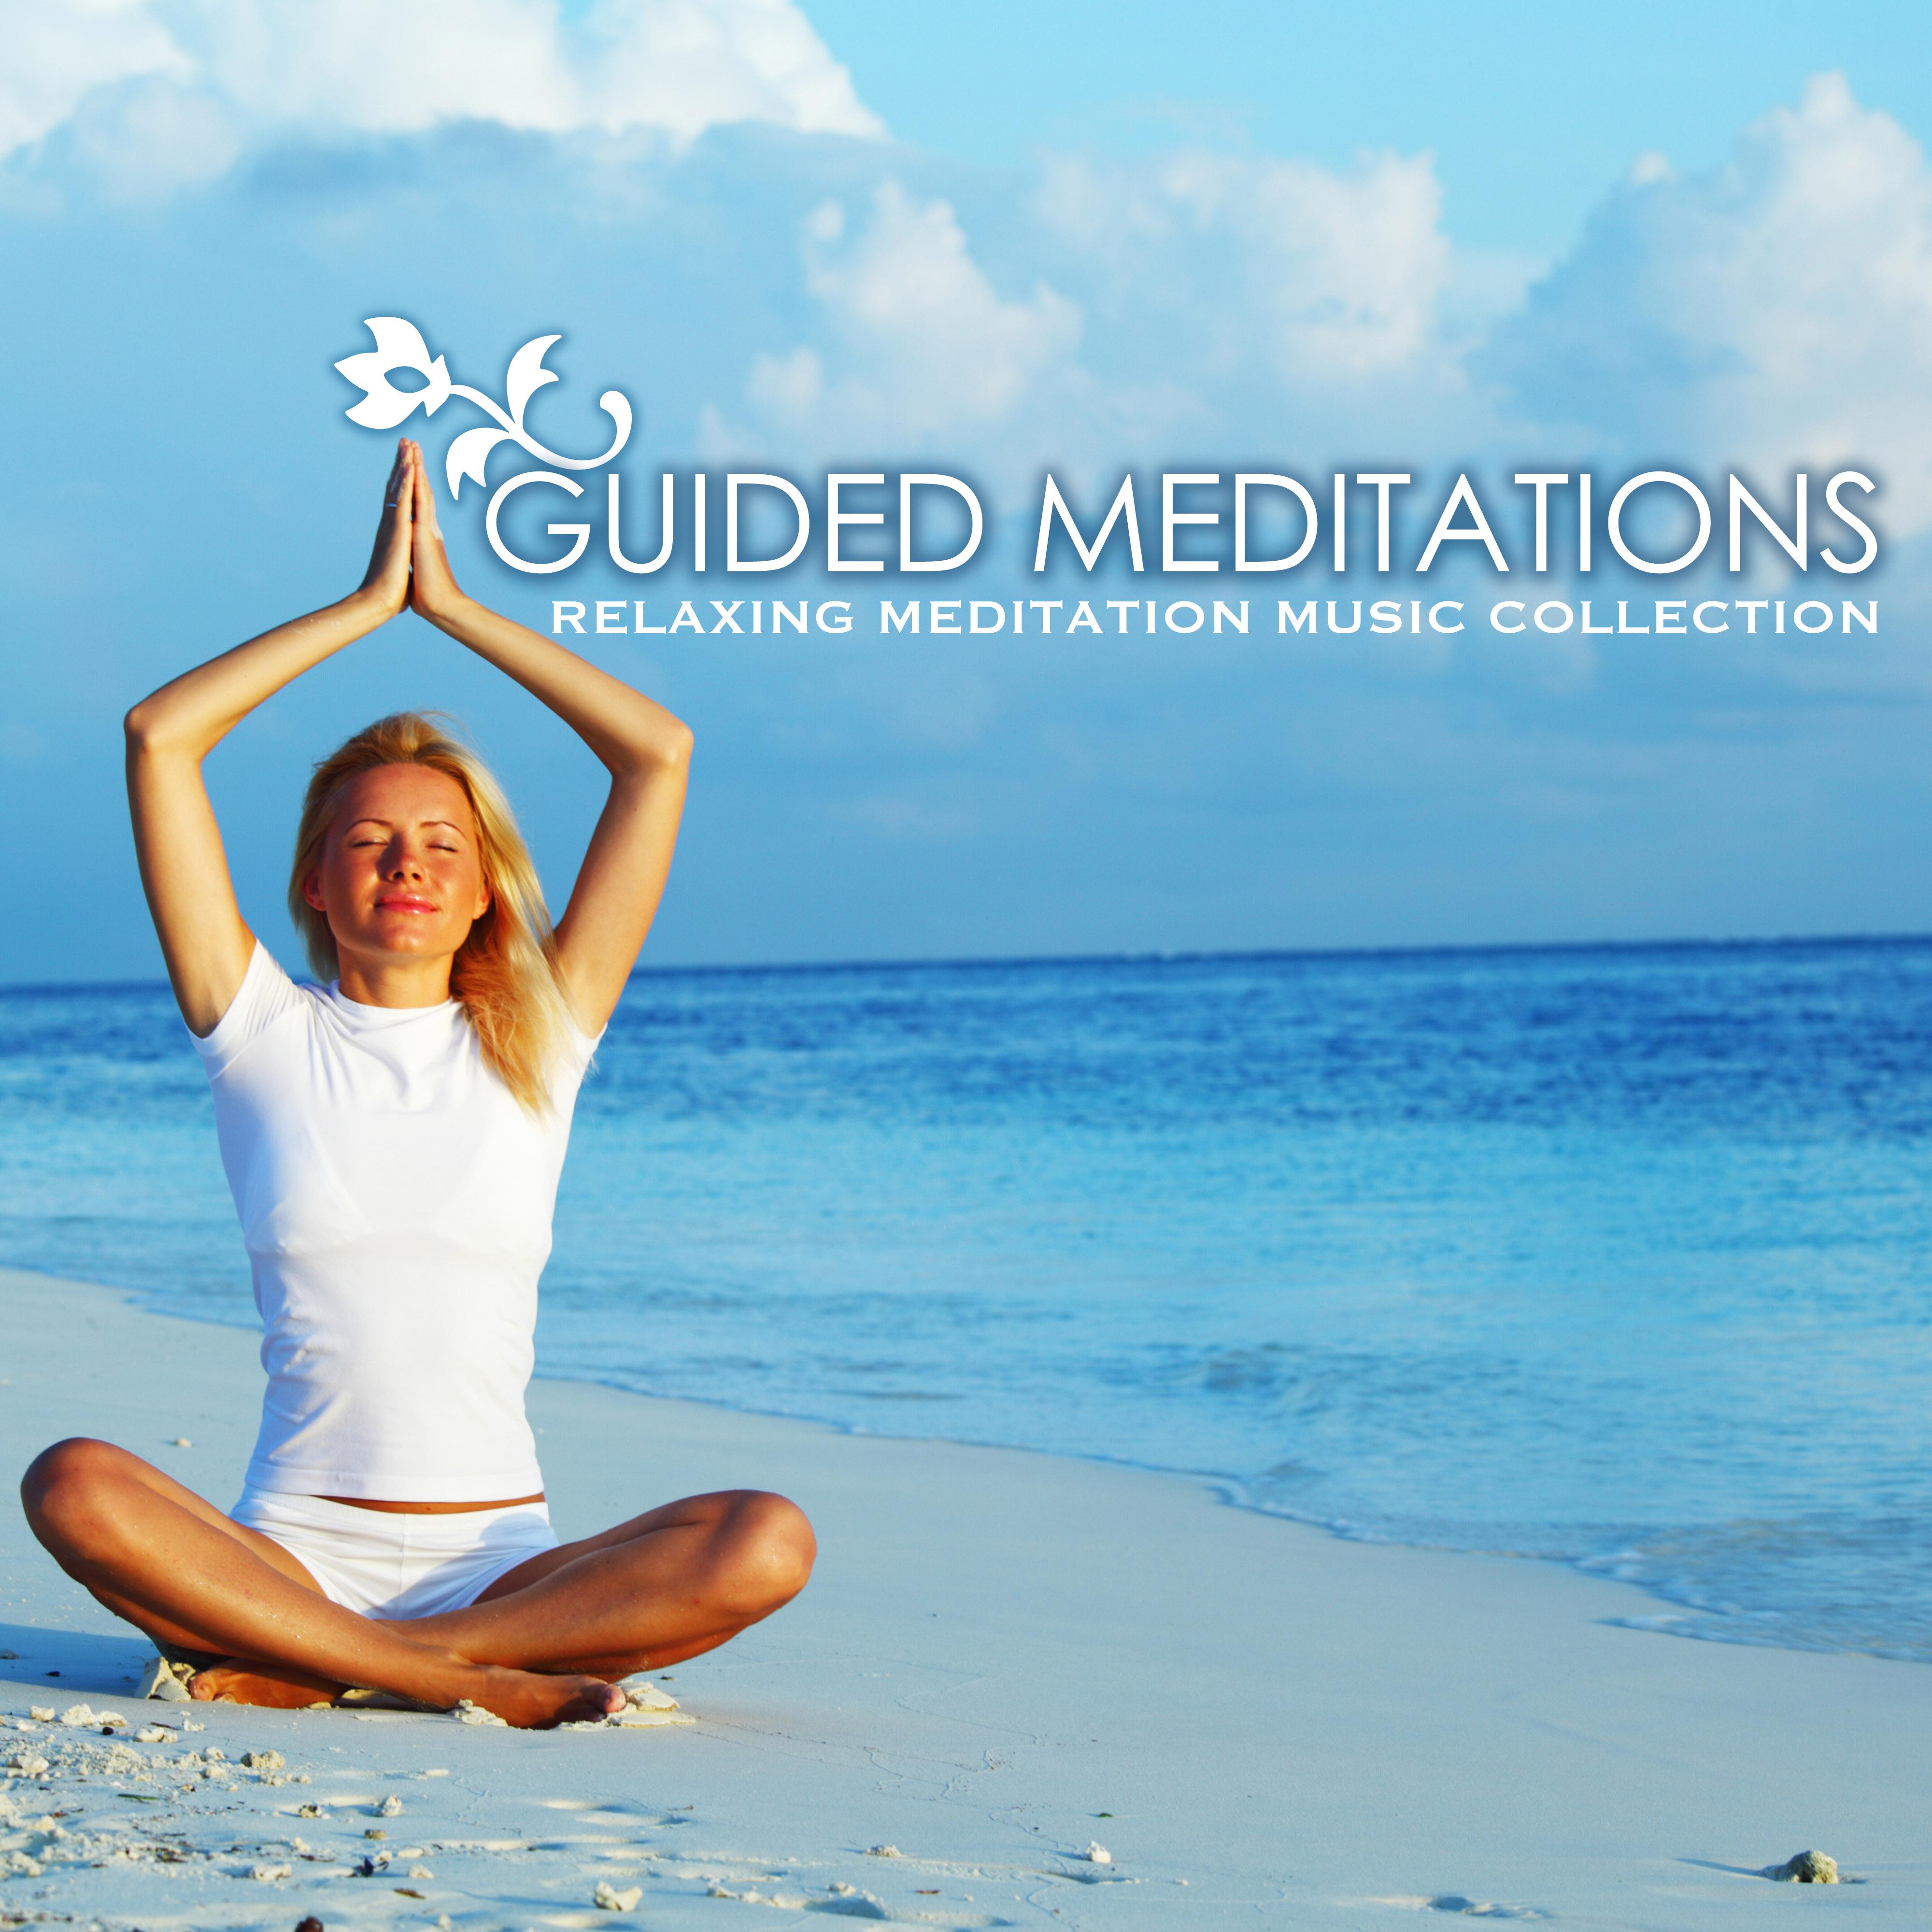 Guided Meditation: for Awareness, Calmness and Love